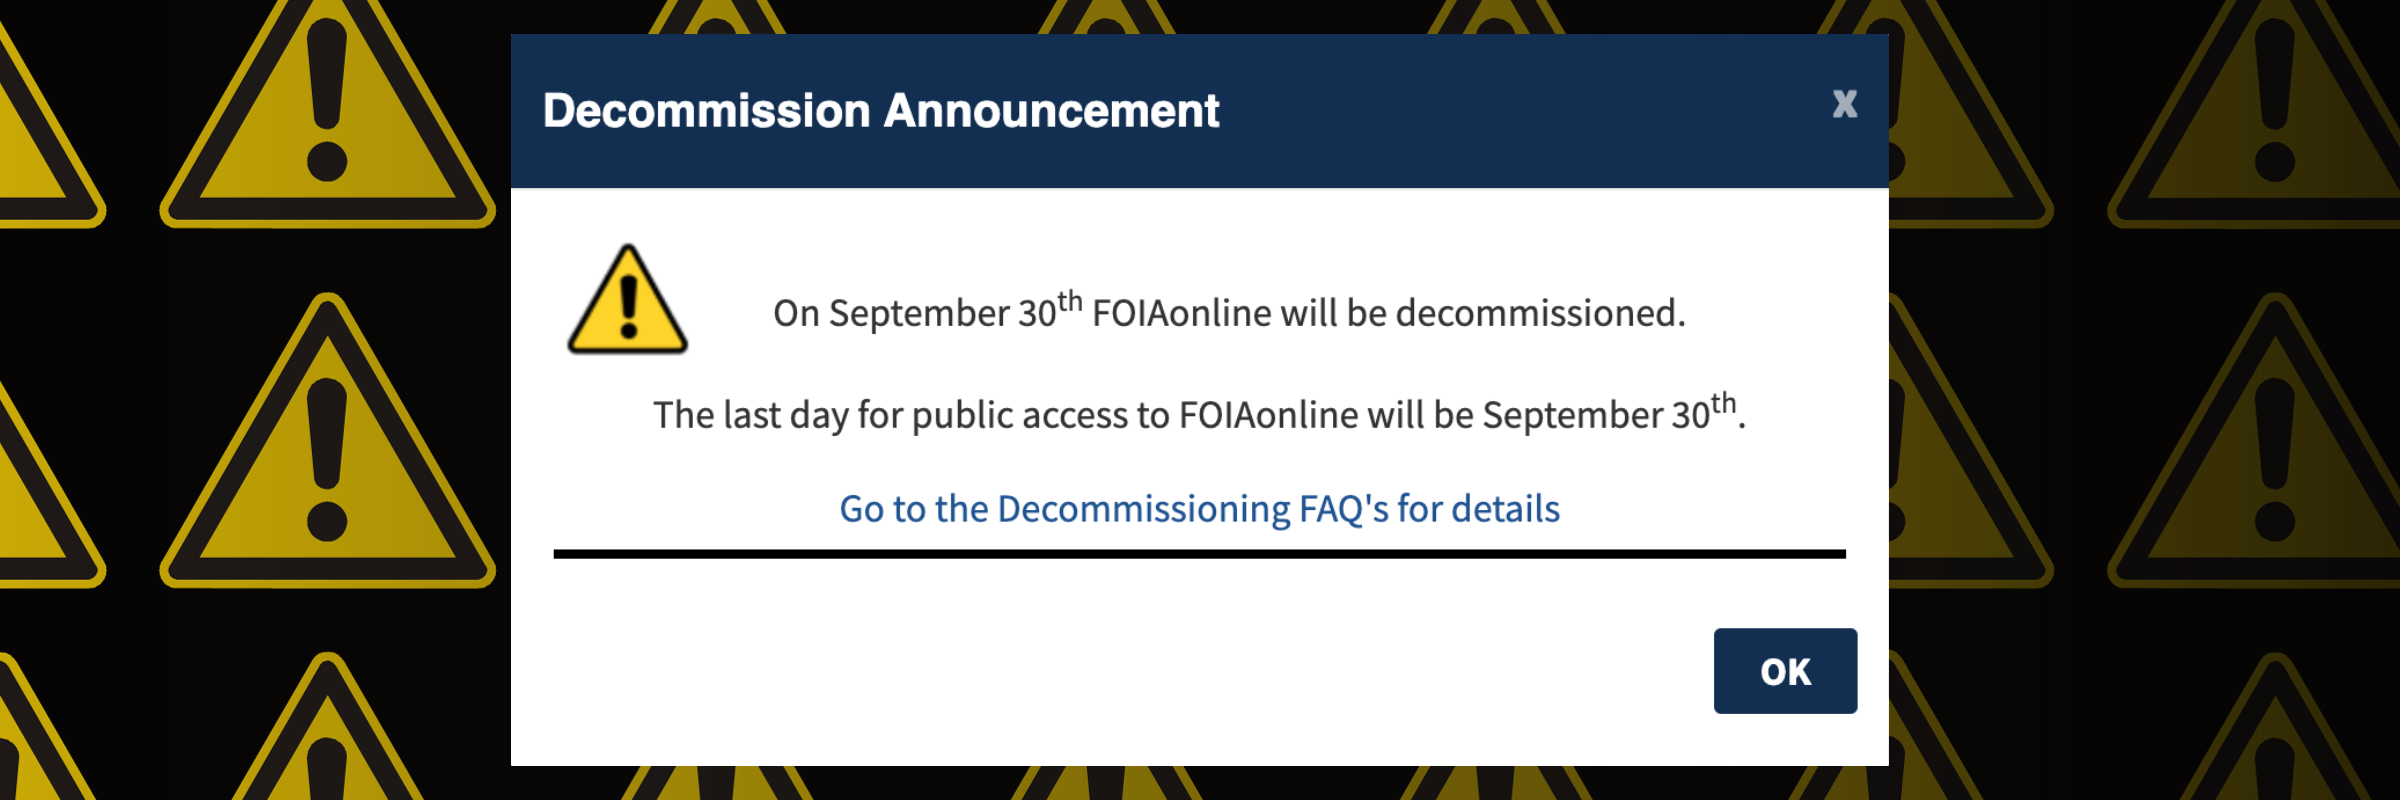 After a decade, FOIAonline is shutting down. What's next for FOIA